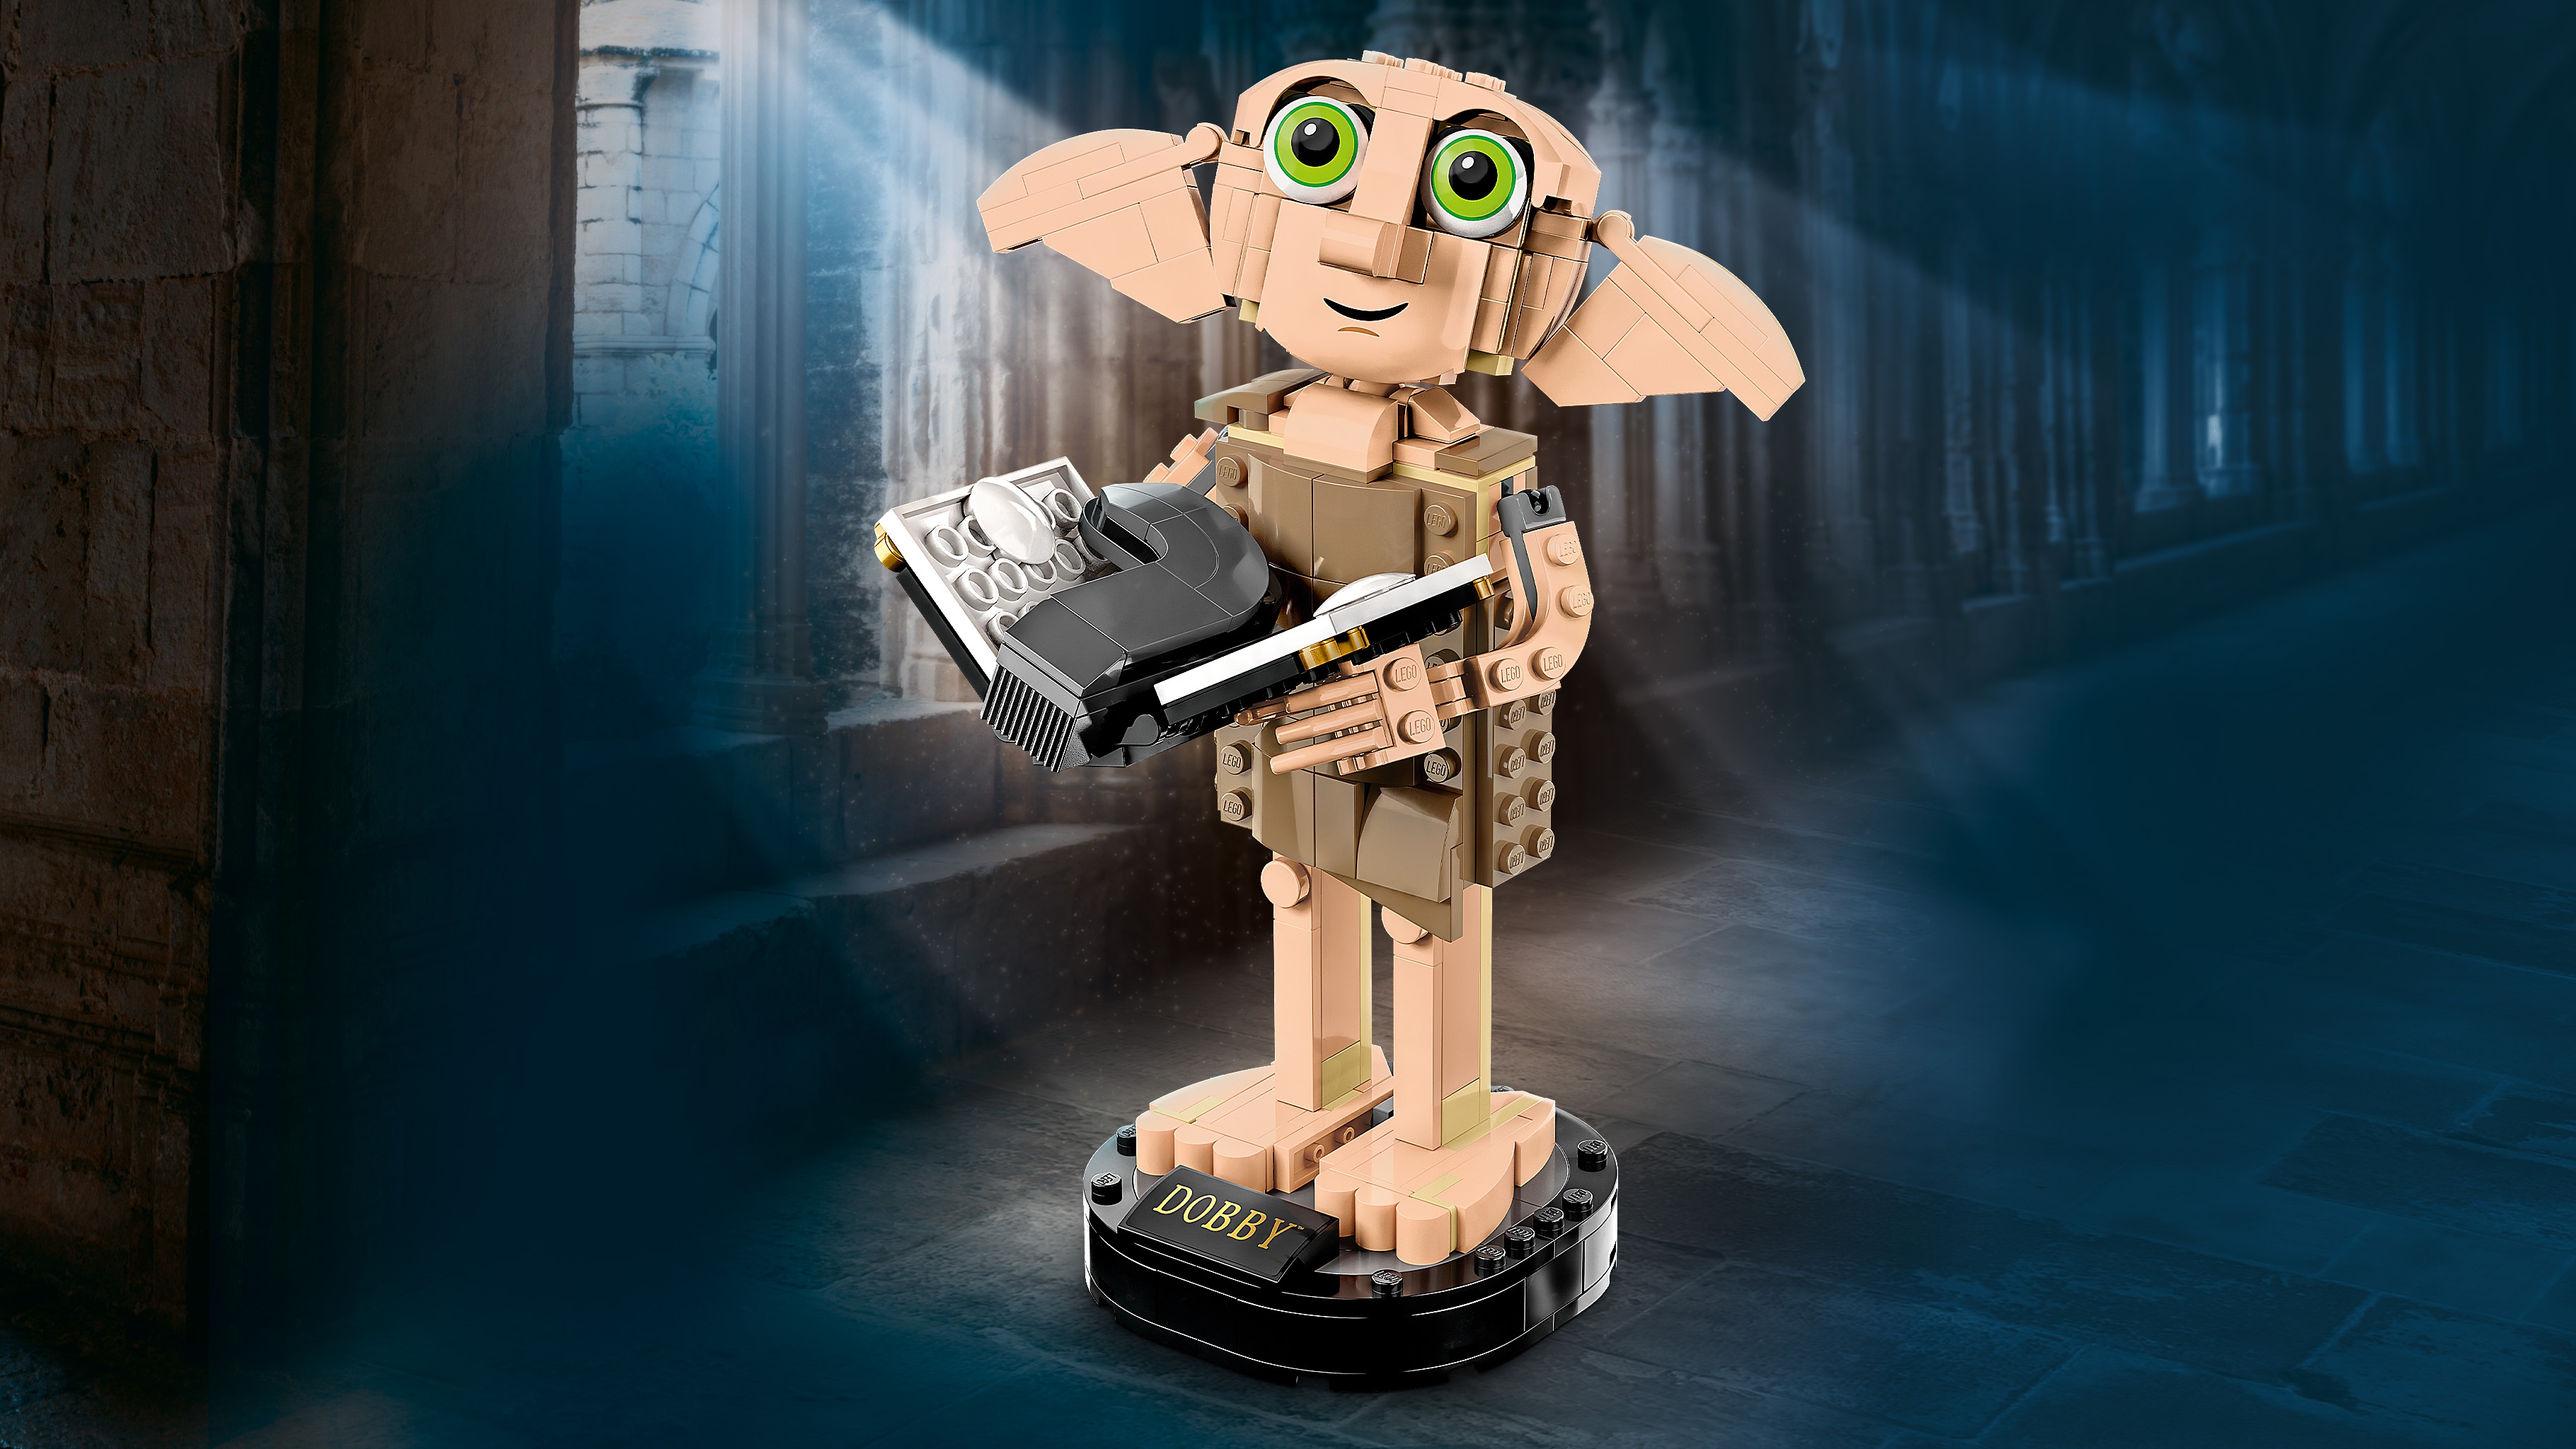 Dobby is free!  Lego pictures, Elf house, Lego harry potter